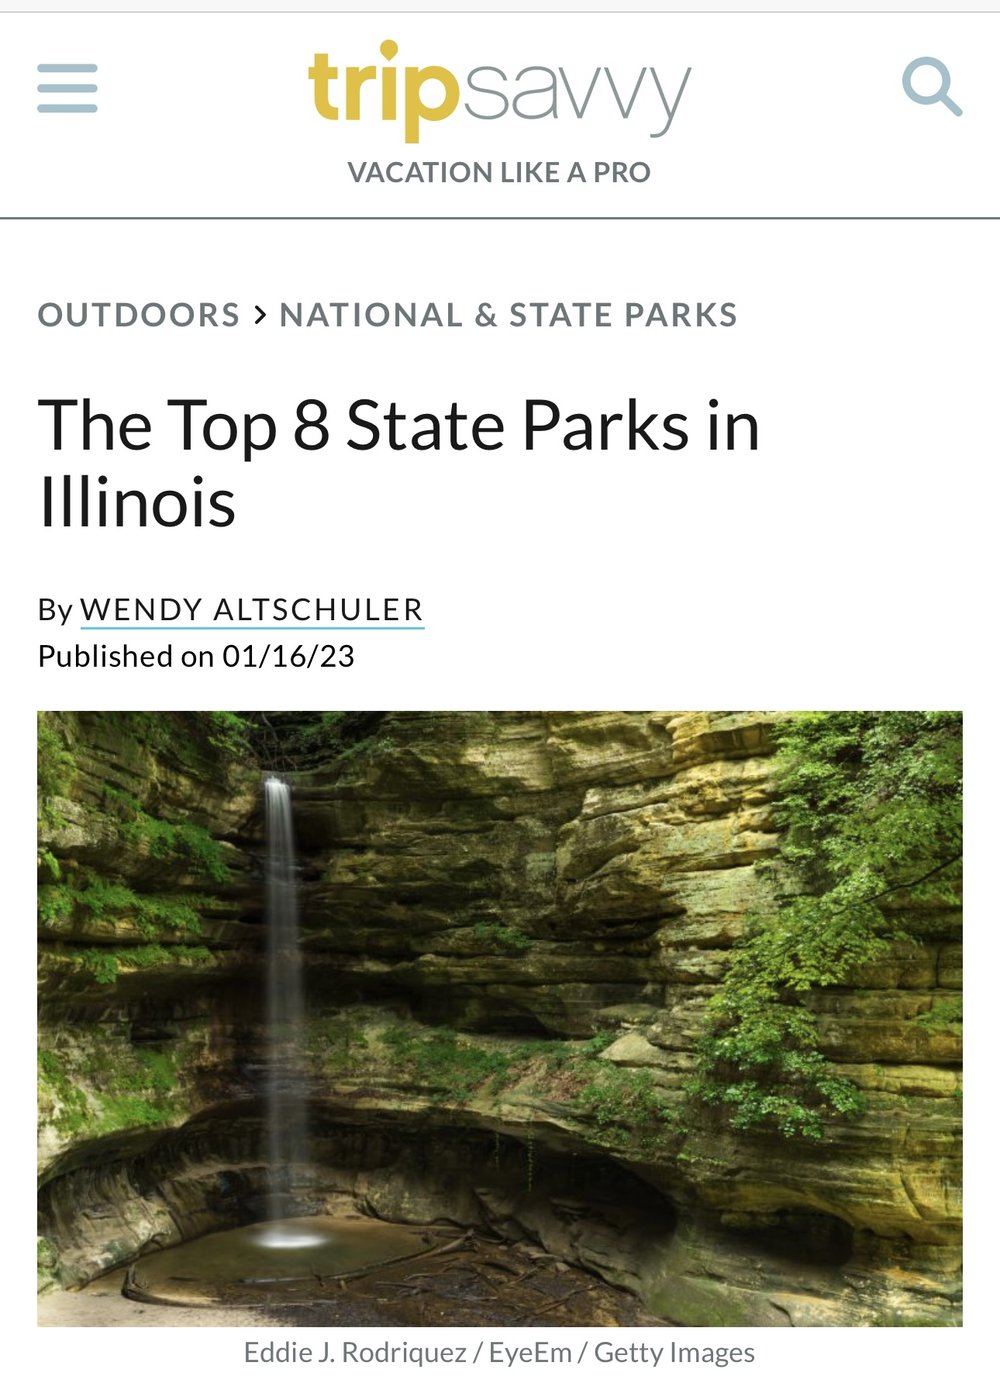 The Top 8 State Parks in Illinois